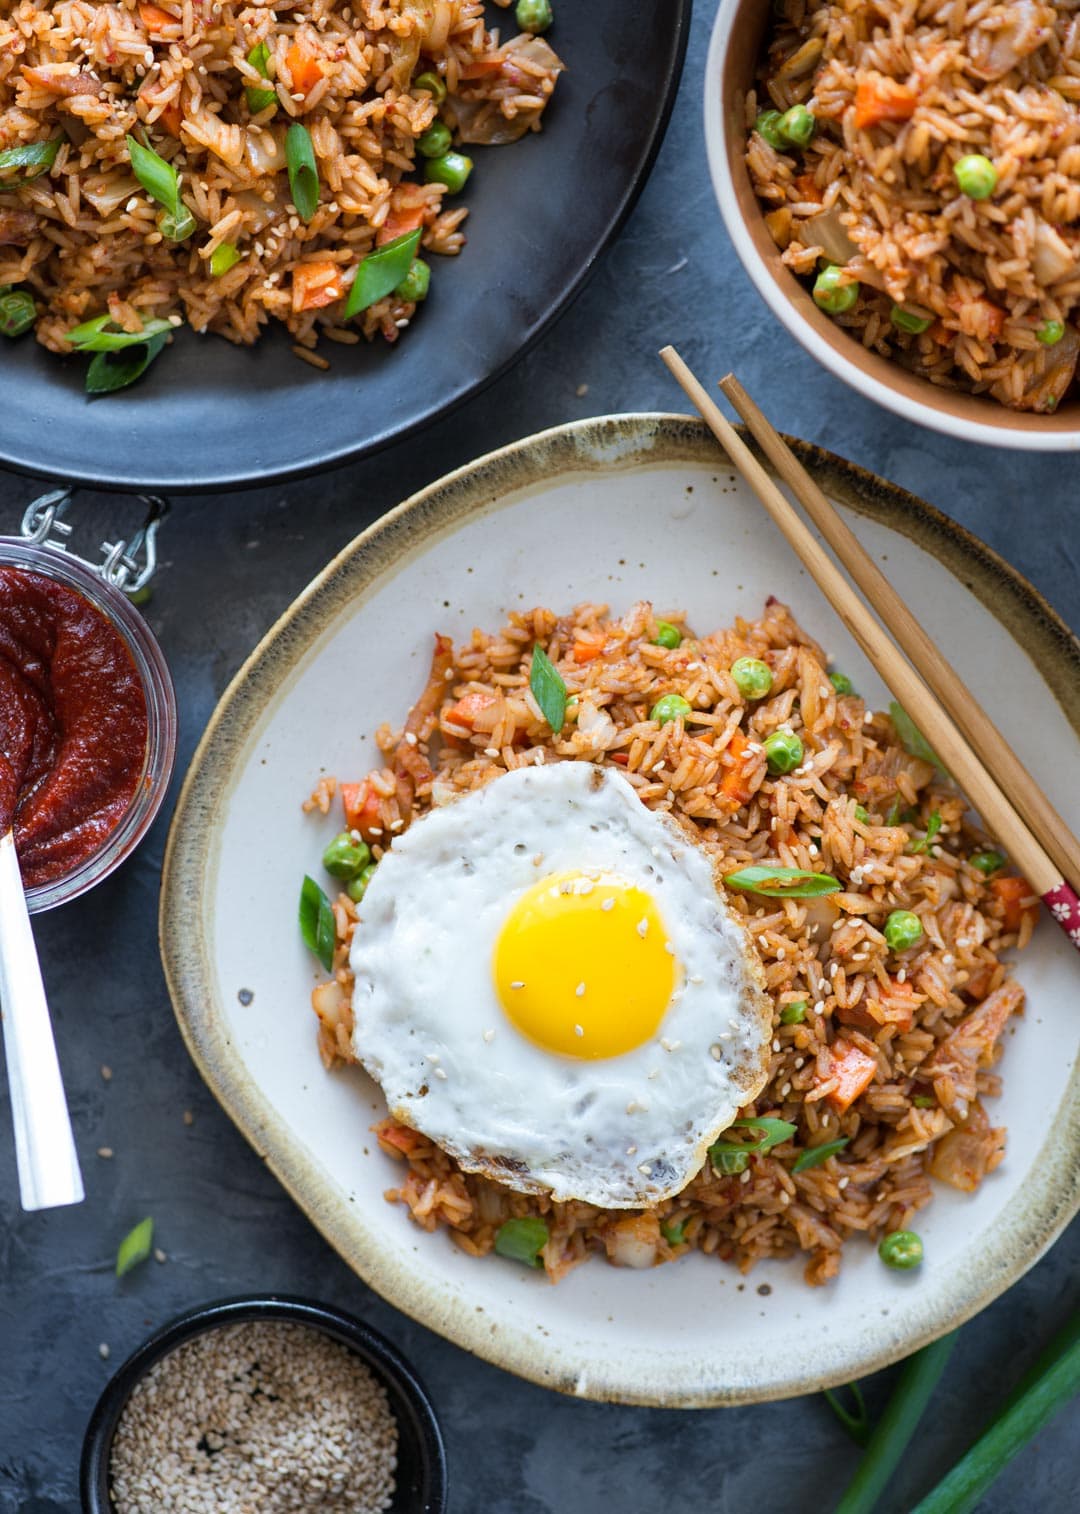 Quick and easy Kimchi Fried rice cooked and plated in a dark and white plate as well as in a bowl with a jar of gochujang and a sunny side up